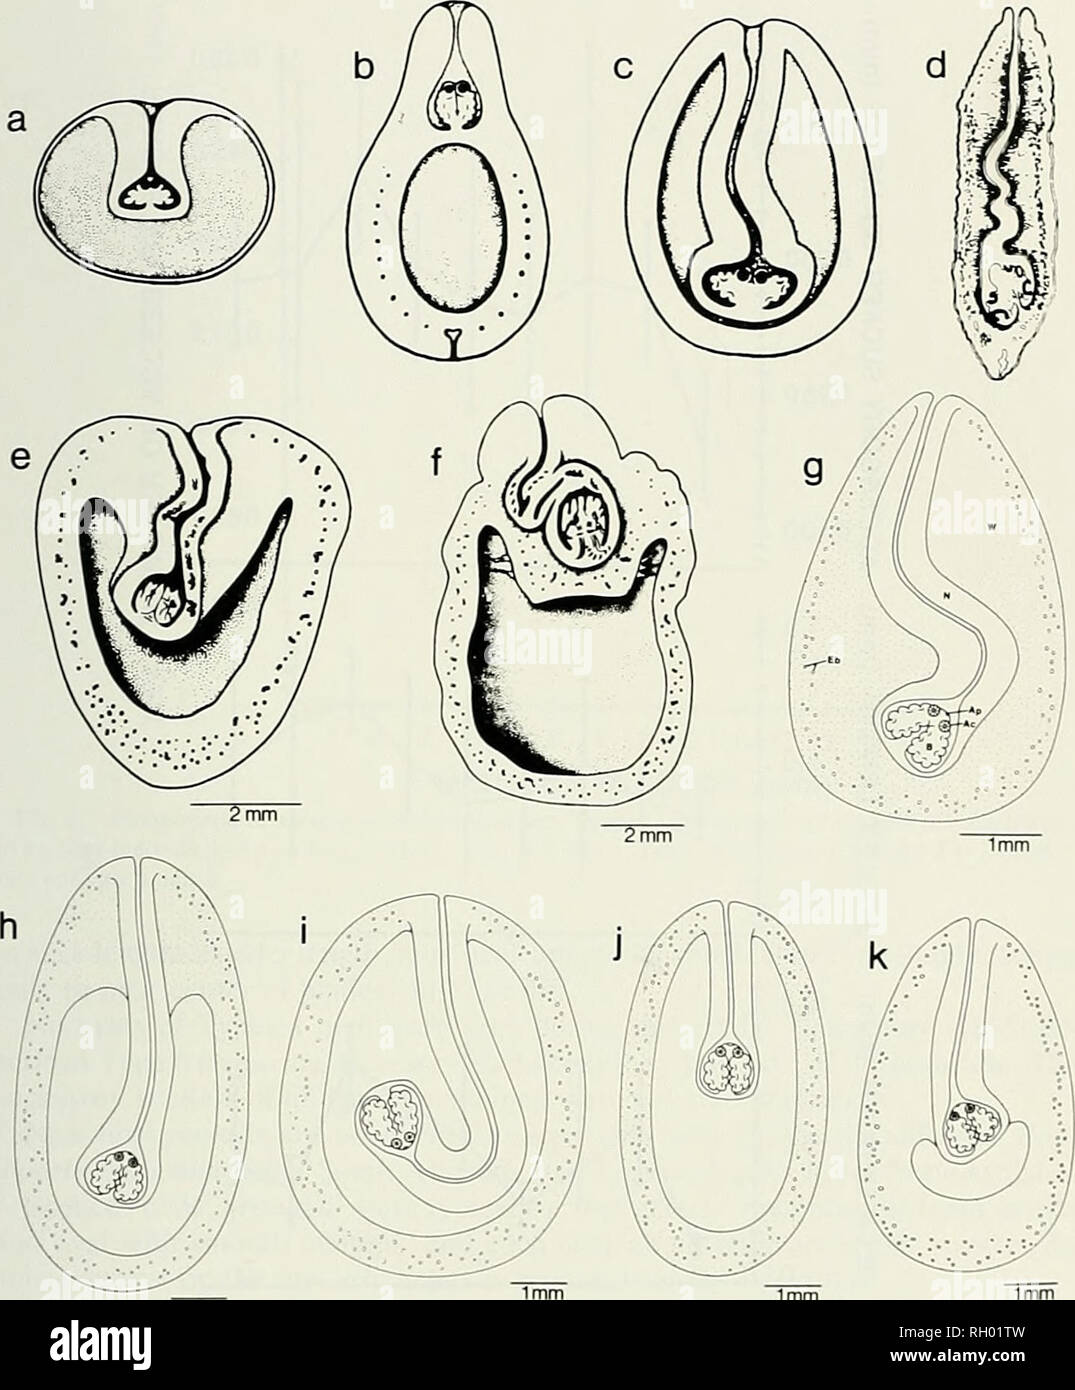 . Bulletin. Science; Natural history; Natural history. NEW MORPHOTYPES OF TETRAPHYLLID CESTODES 103. 1mm 1mm Fig. I. Morphotypes of Fhyllnholhriiini delphini: a-c. morphotypes 1-3 (Guiart, 1935): d. mor- pholype 4 (Baer. 1932); e-f. morphotypes 5-6 (Delyatnure. 1955); g-k, morphotypes 7-11 (original). Ac. accessory sucker; .^p. apical sucker; B, bothridium; Eb. excretory tubules of bladder wall: N. invaginated neck: W. bladder wall. (No size scales available for Figs, la-d.) vaginated neck and scolex are in contact with the bladder wail. However, it differs from Type 4 (as figured by Baer 1193 Stock Photo